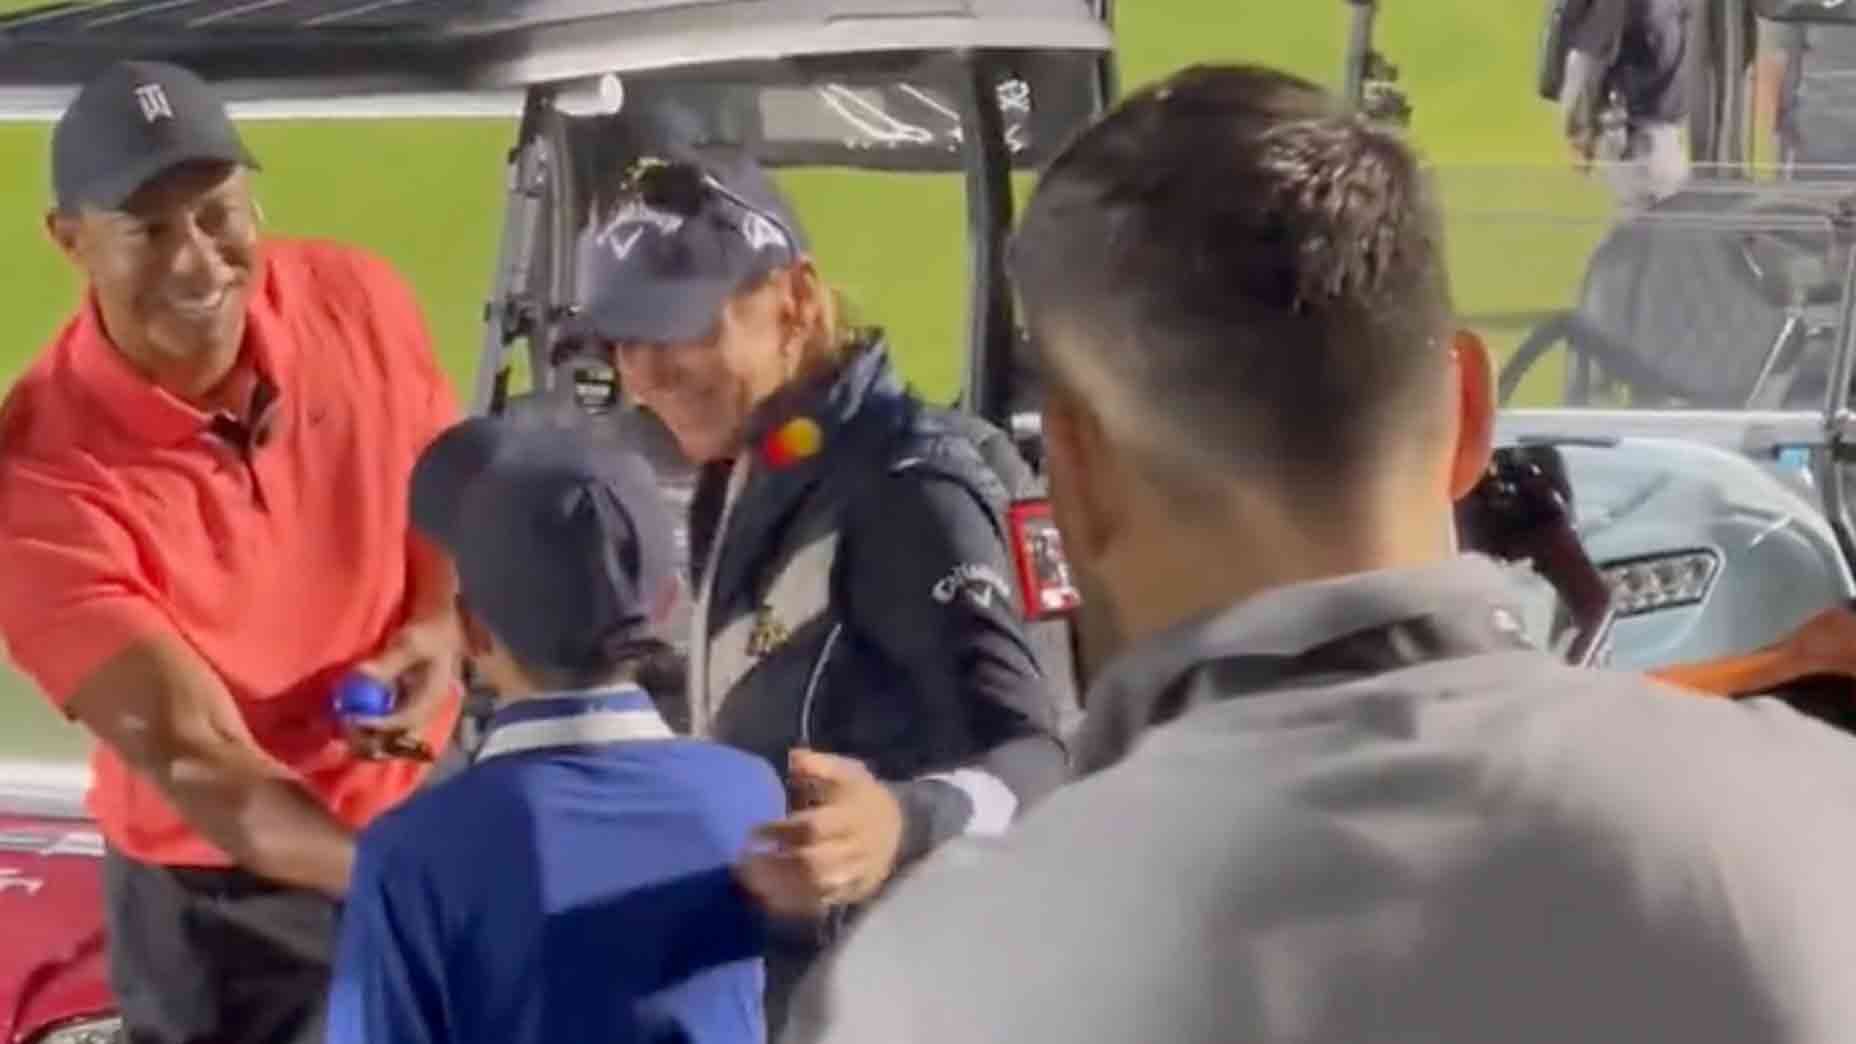 Tiger Woods shares sweet interaction with Annika Sorenstam's son